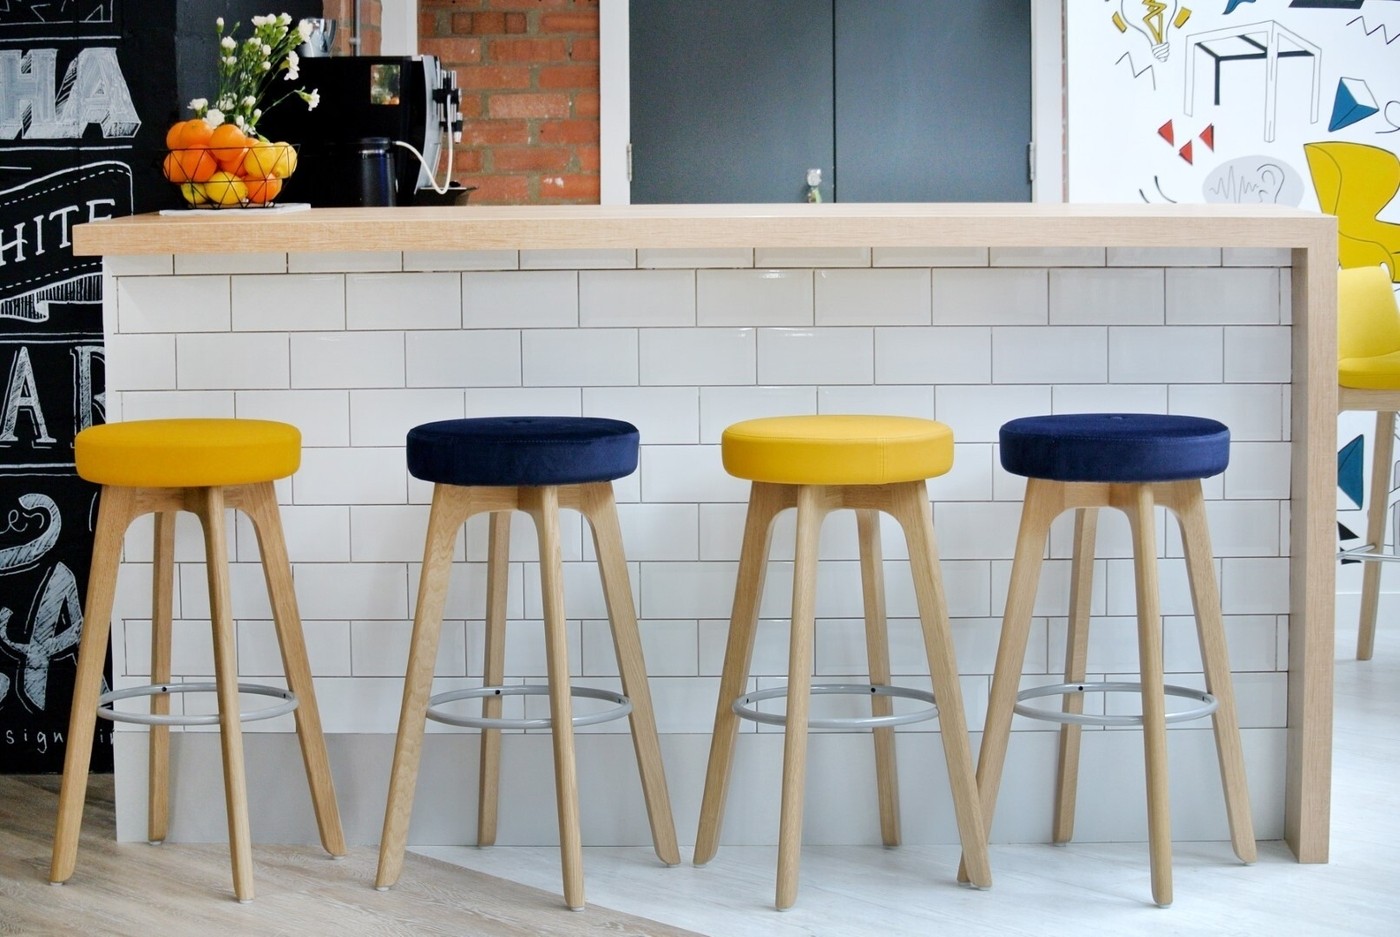 Colored stools